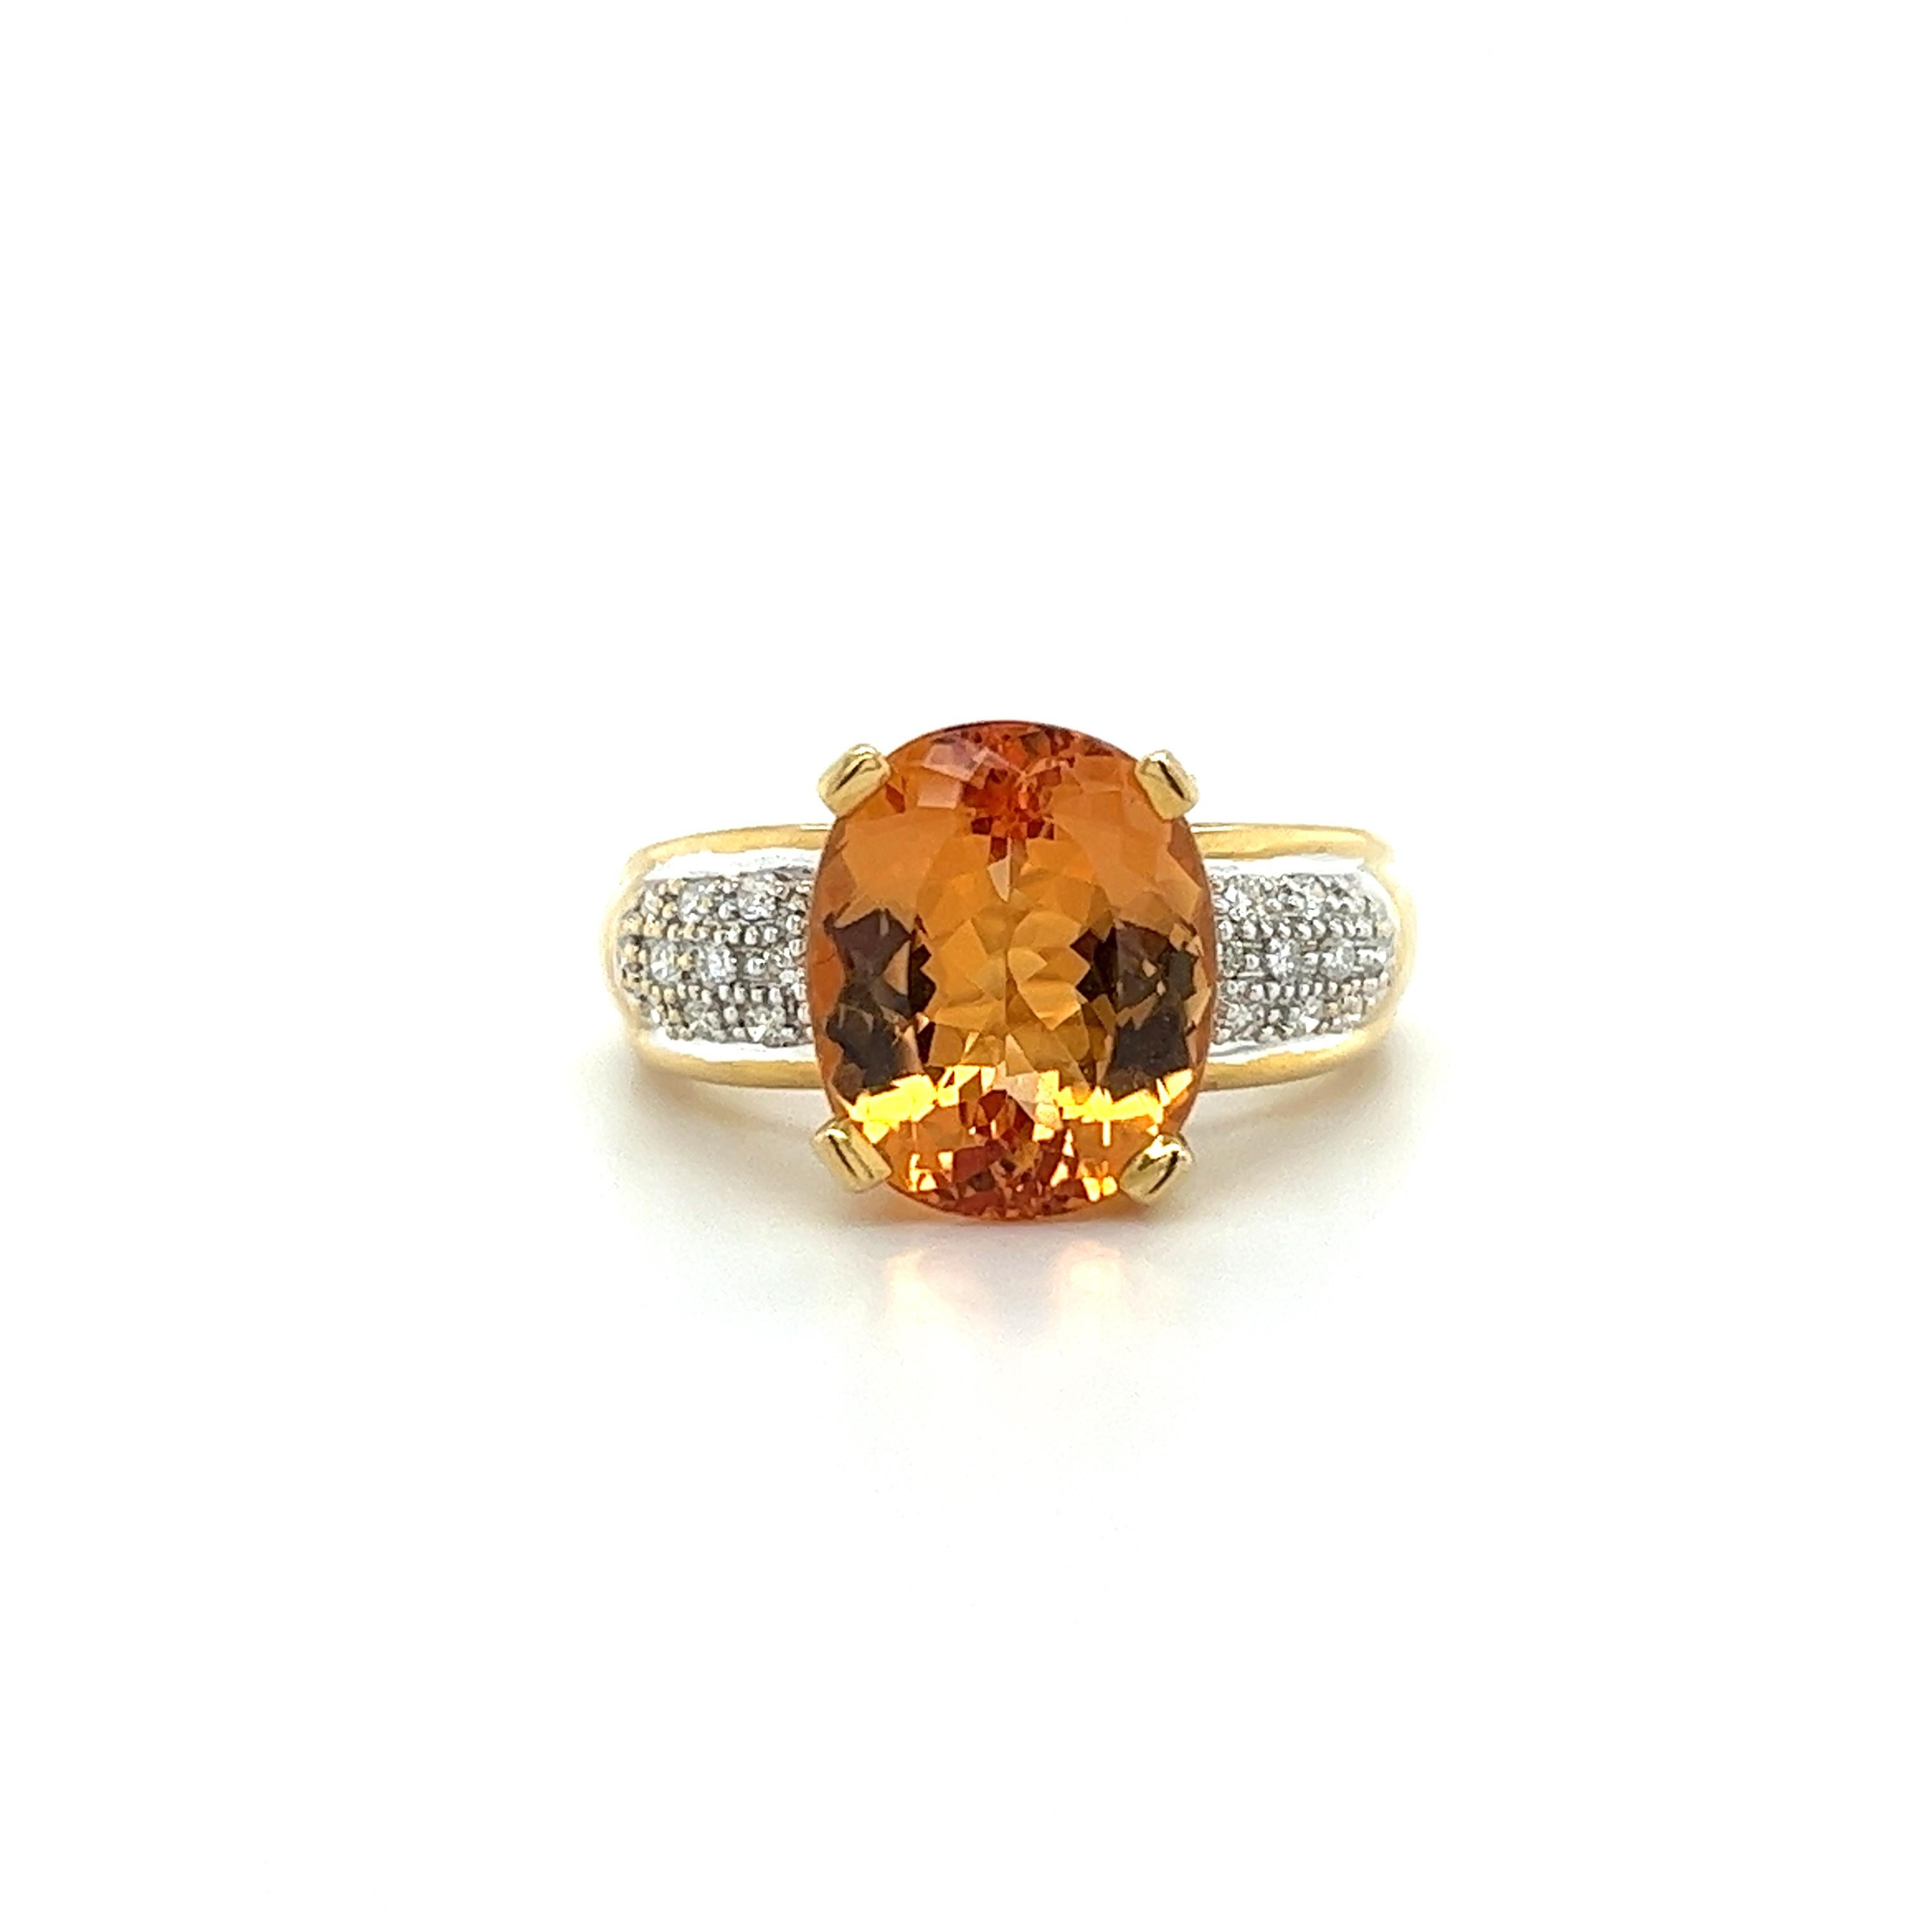 A vintage topaz and diamond ring, set in 18k solid yellow and white gold, containing a natural oval cut orange topaz. The ring contains round side diamonds with a cumulative weight of 0.30 carats. Total gram weight of the ring is 8.37 grams. A